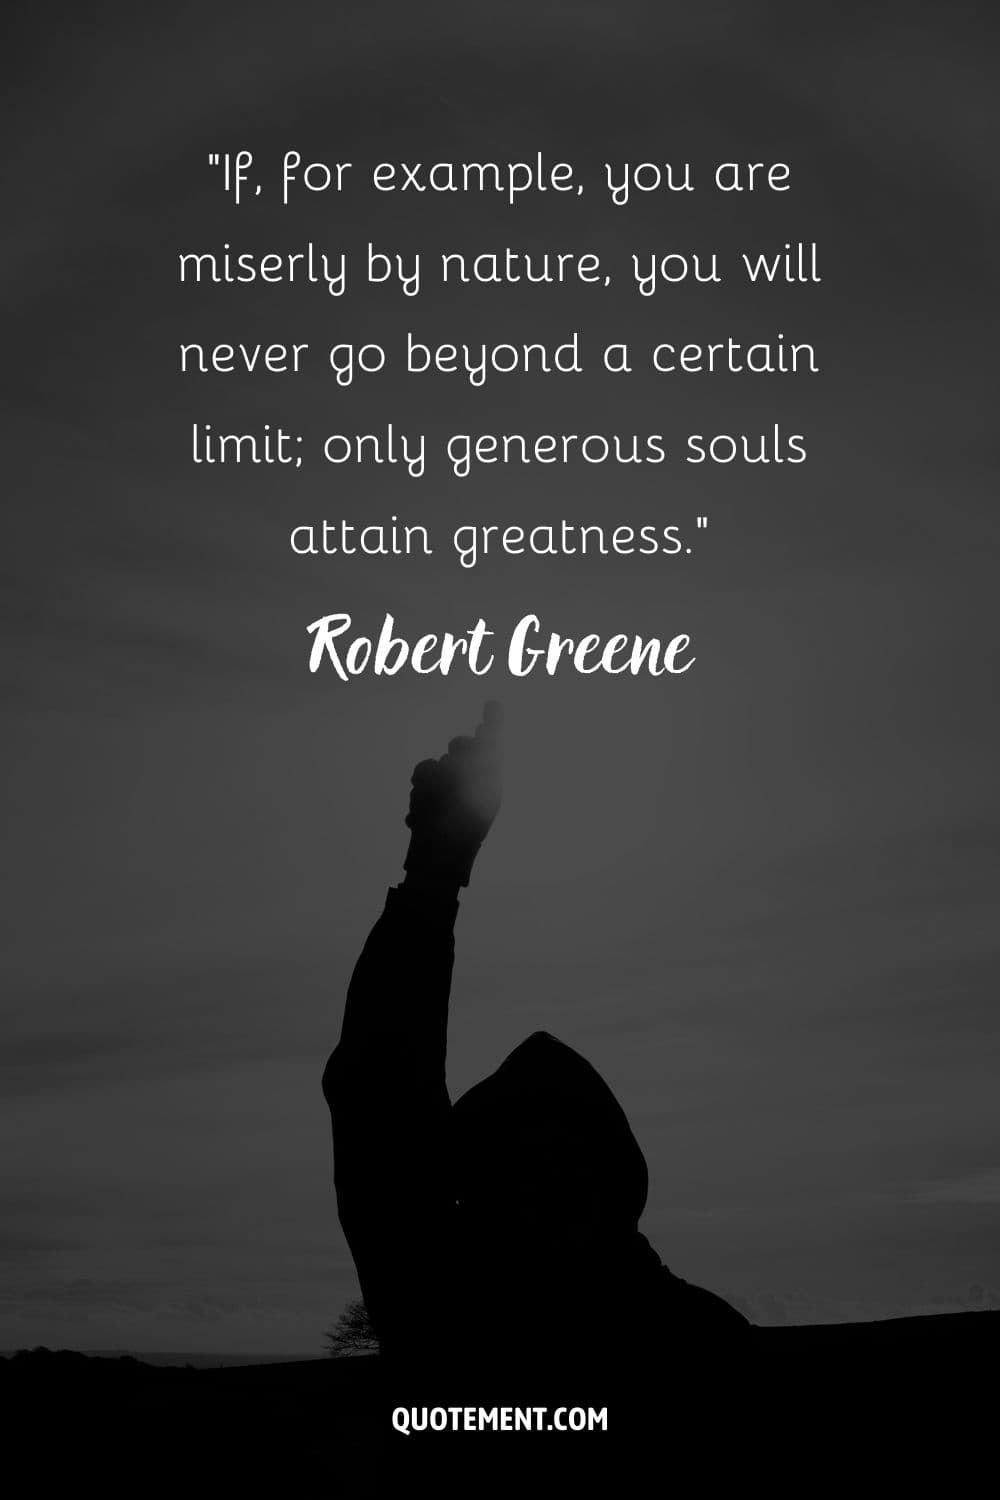 “If, for example, you are miserly by nature, you will never go beyond a certain limit; only generous souls attain greatness.” ― Robert Greene, The 48 Laws of Power